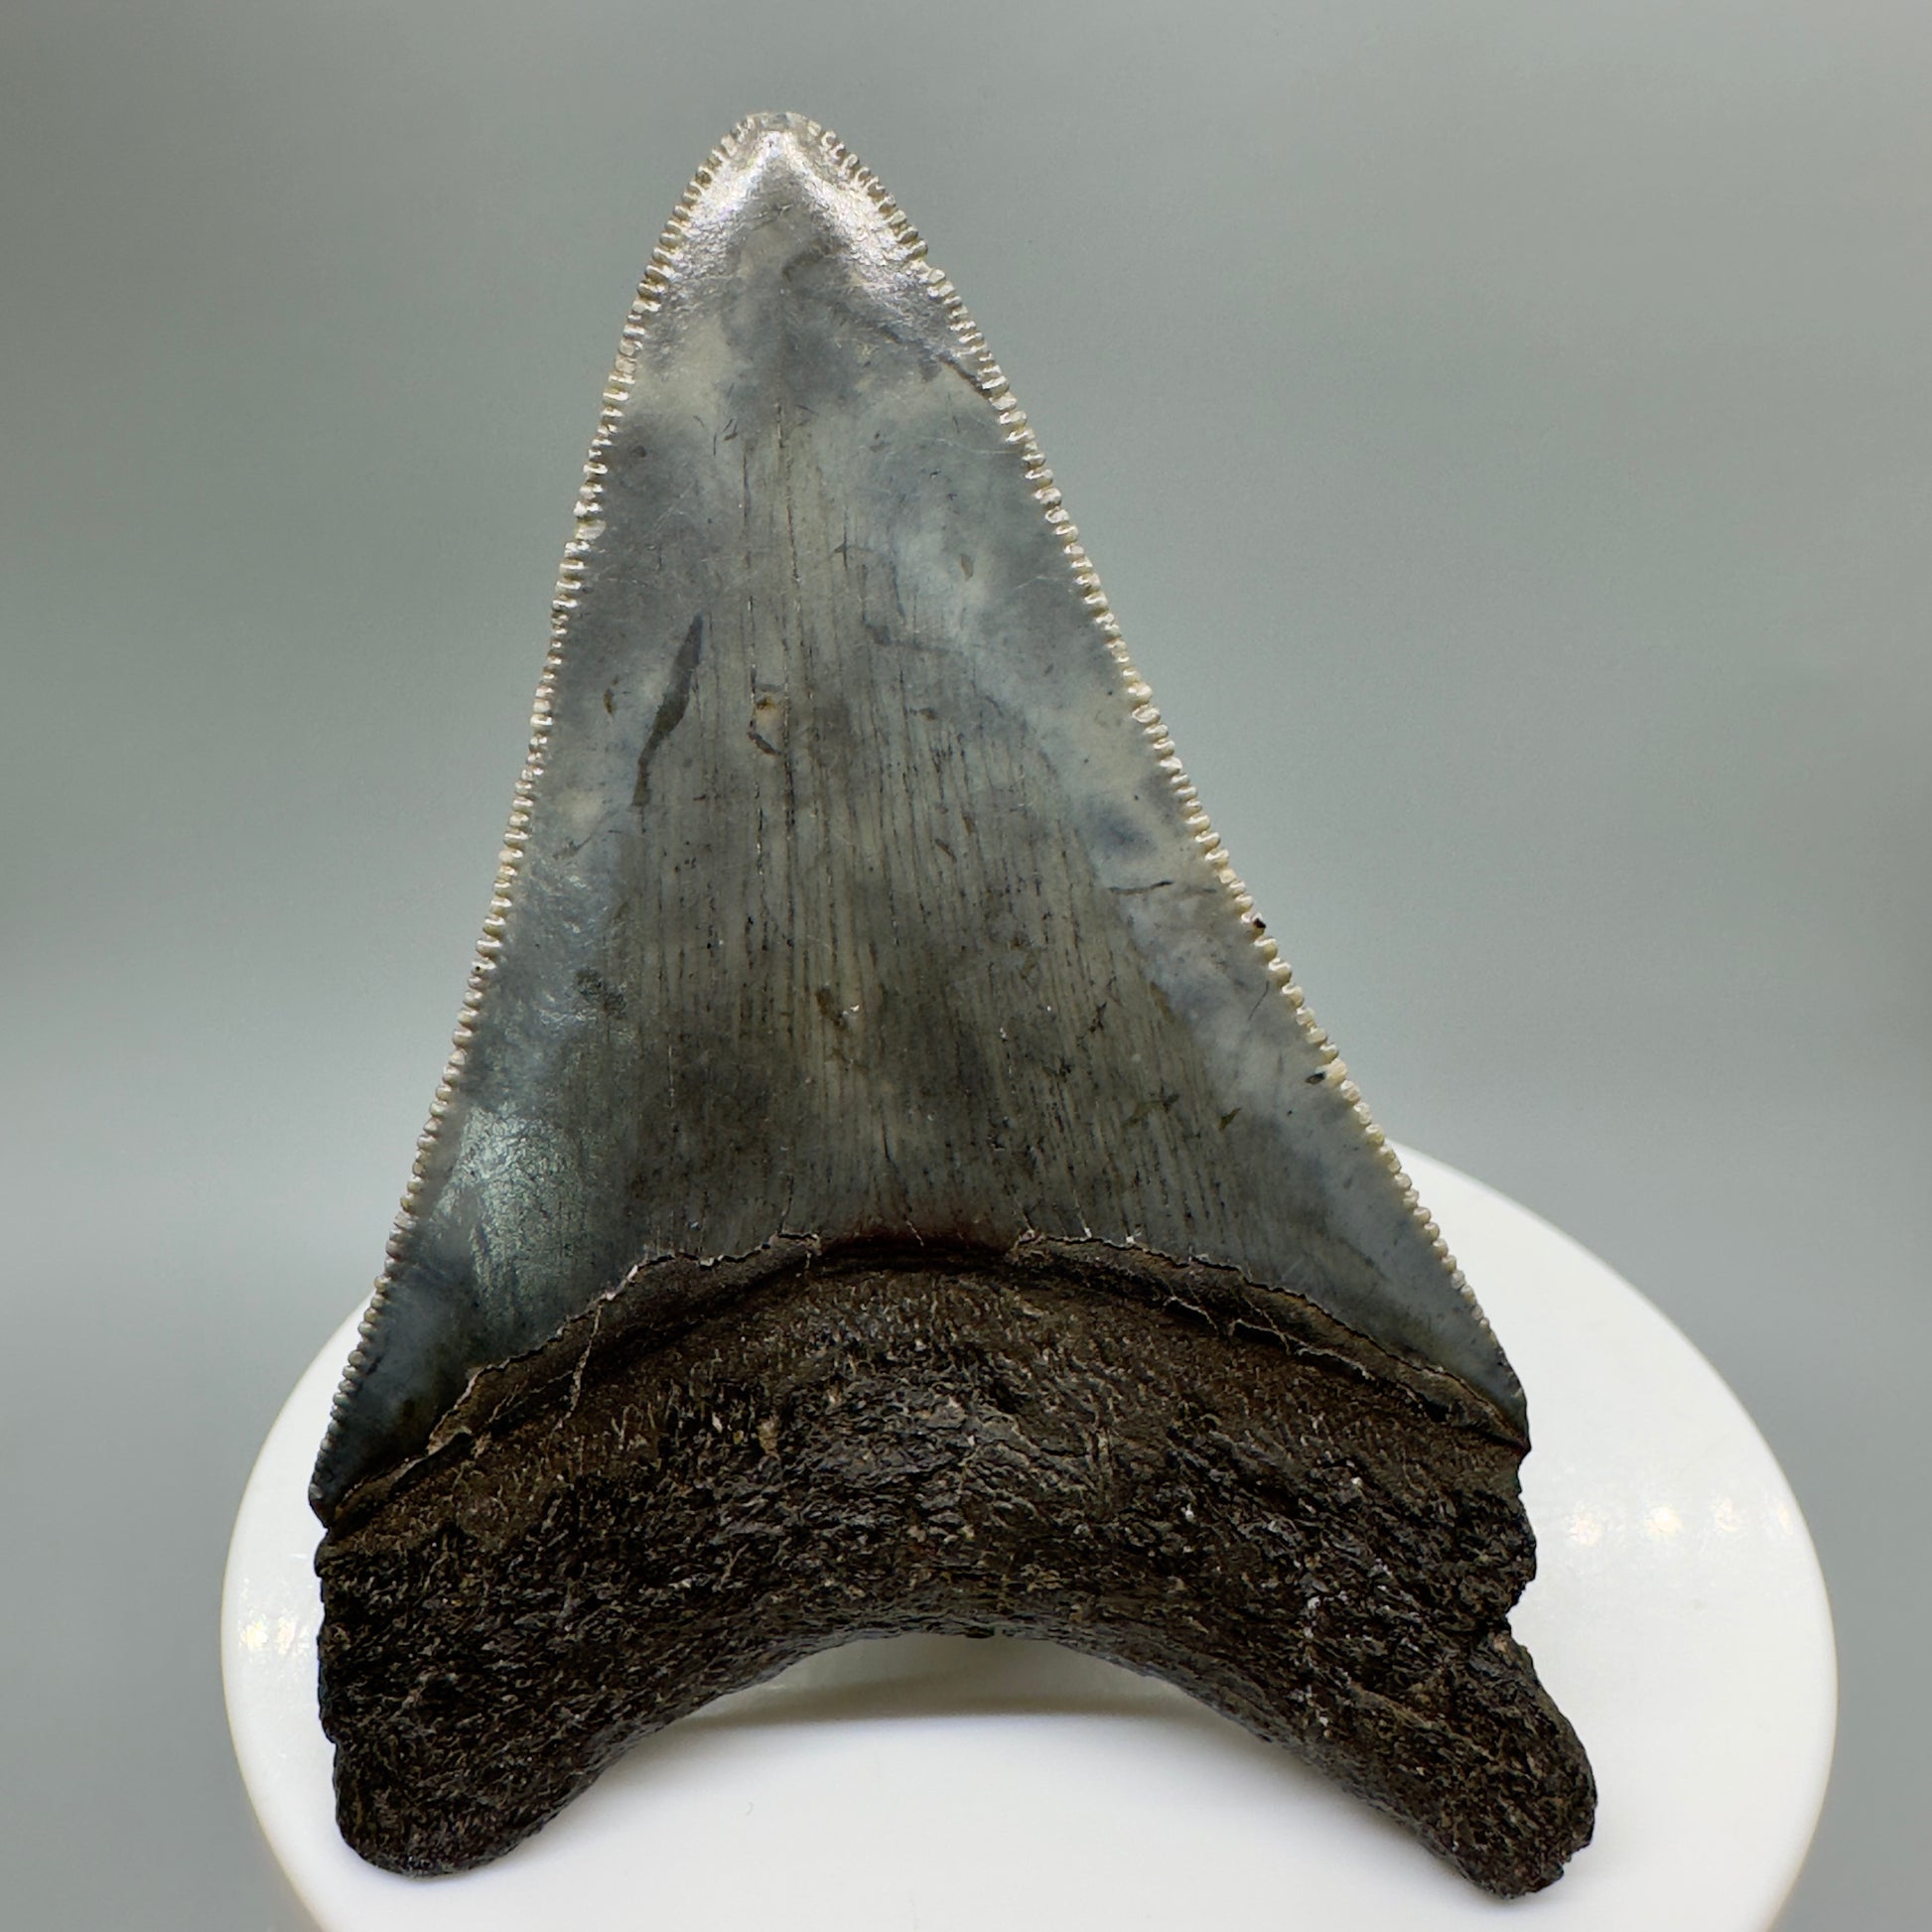 Colorful, serrated 2.73" Fossil Megalodon Tooth from South Carolina CM4663 - Back